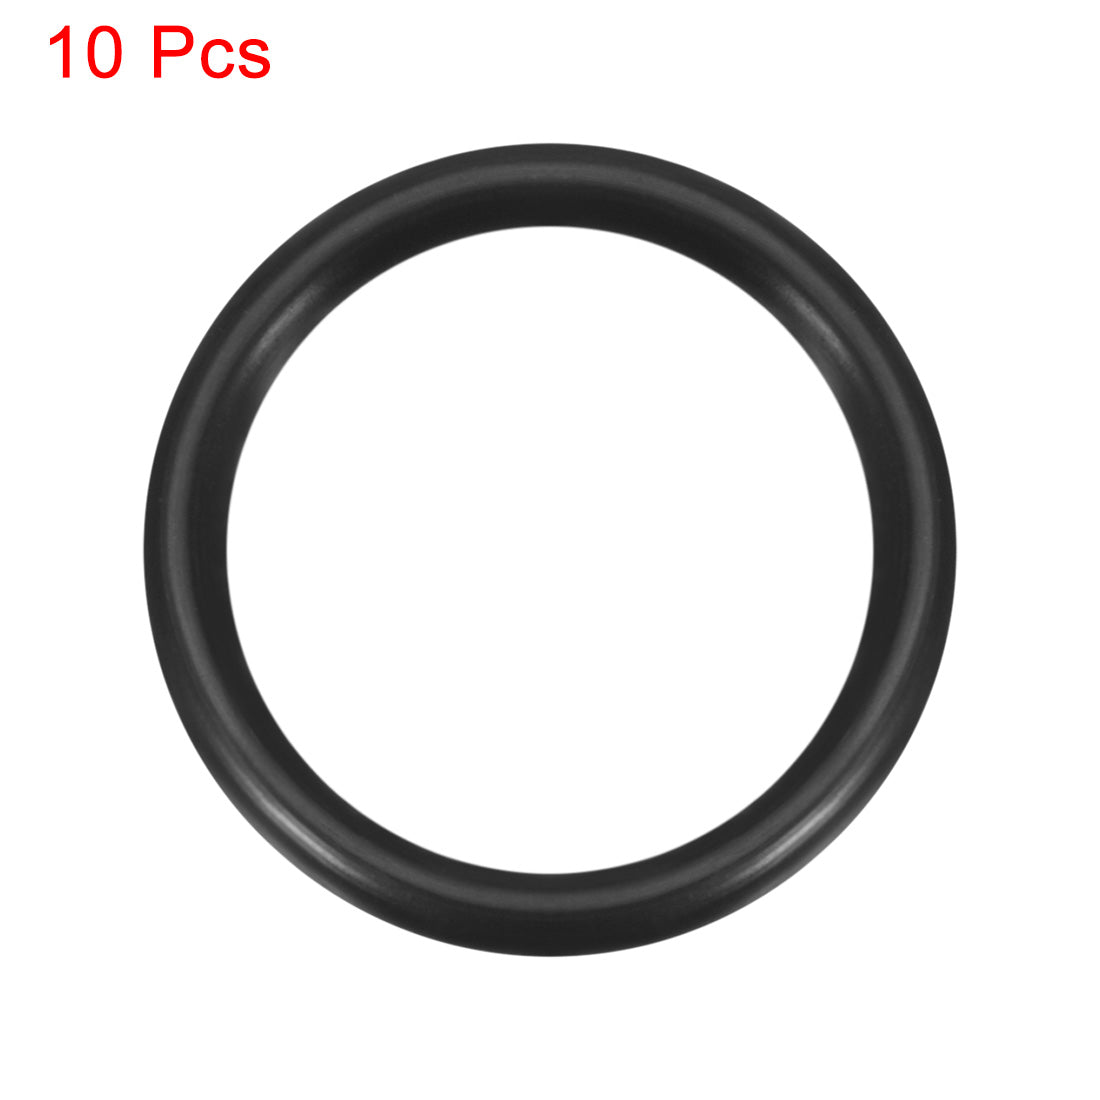 uxcell Uxcell O-Rings Nitrile Rubber 19mm x 24.3mm x 2.65mm Seal Rings Sealing Gasket 10pcs